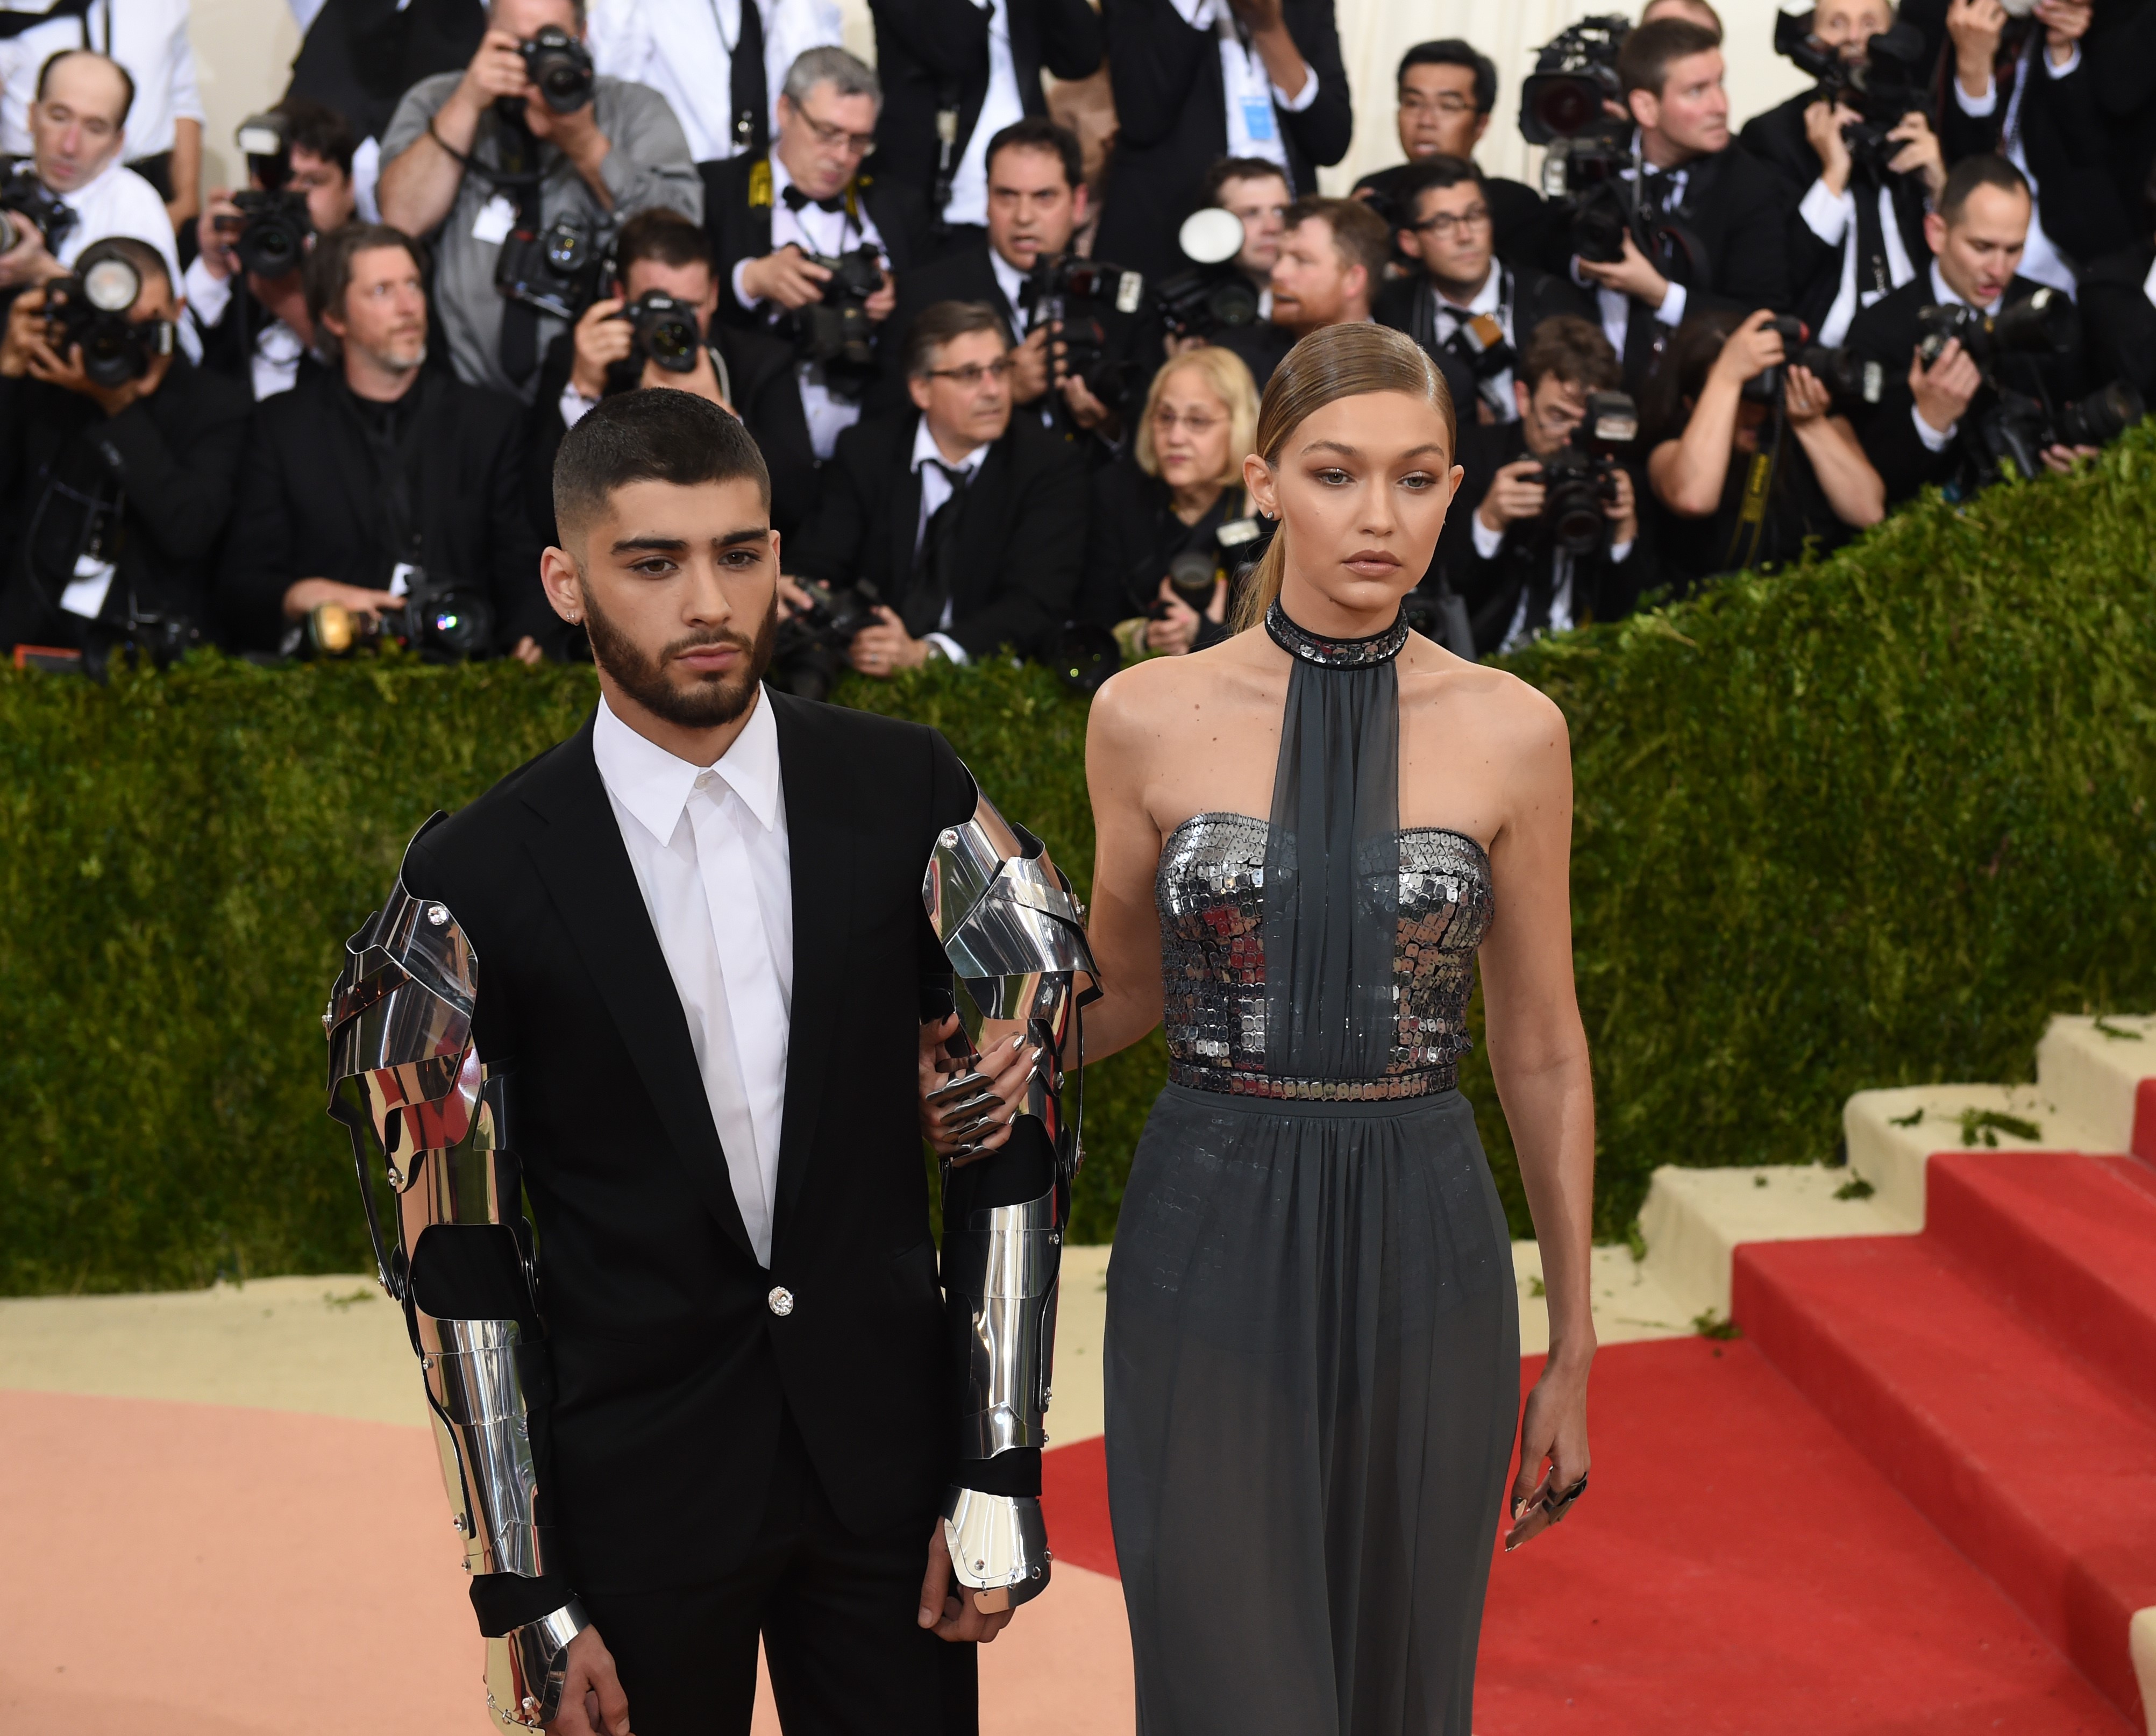 Zayn Malik and Gigi Hadid at the Met Gala red carpet in 2016 | Source: Getty Images